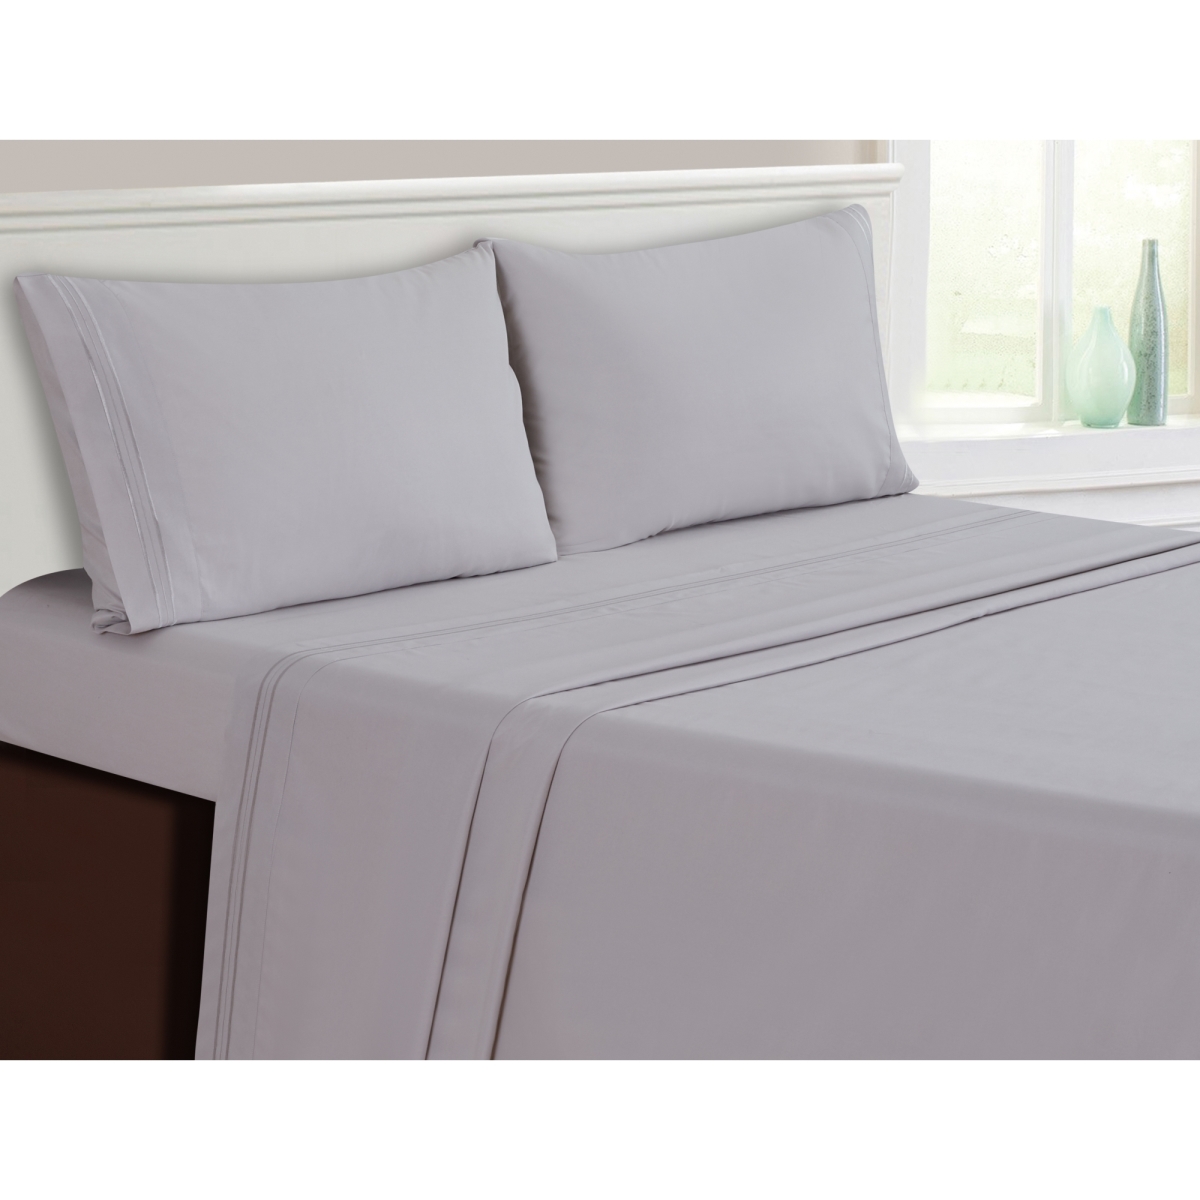 Whtx607-lgk 3-line Embroidered Light Grey Polyester Sheet Set - King Size - 4 Piece